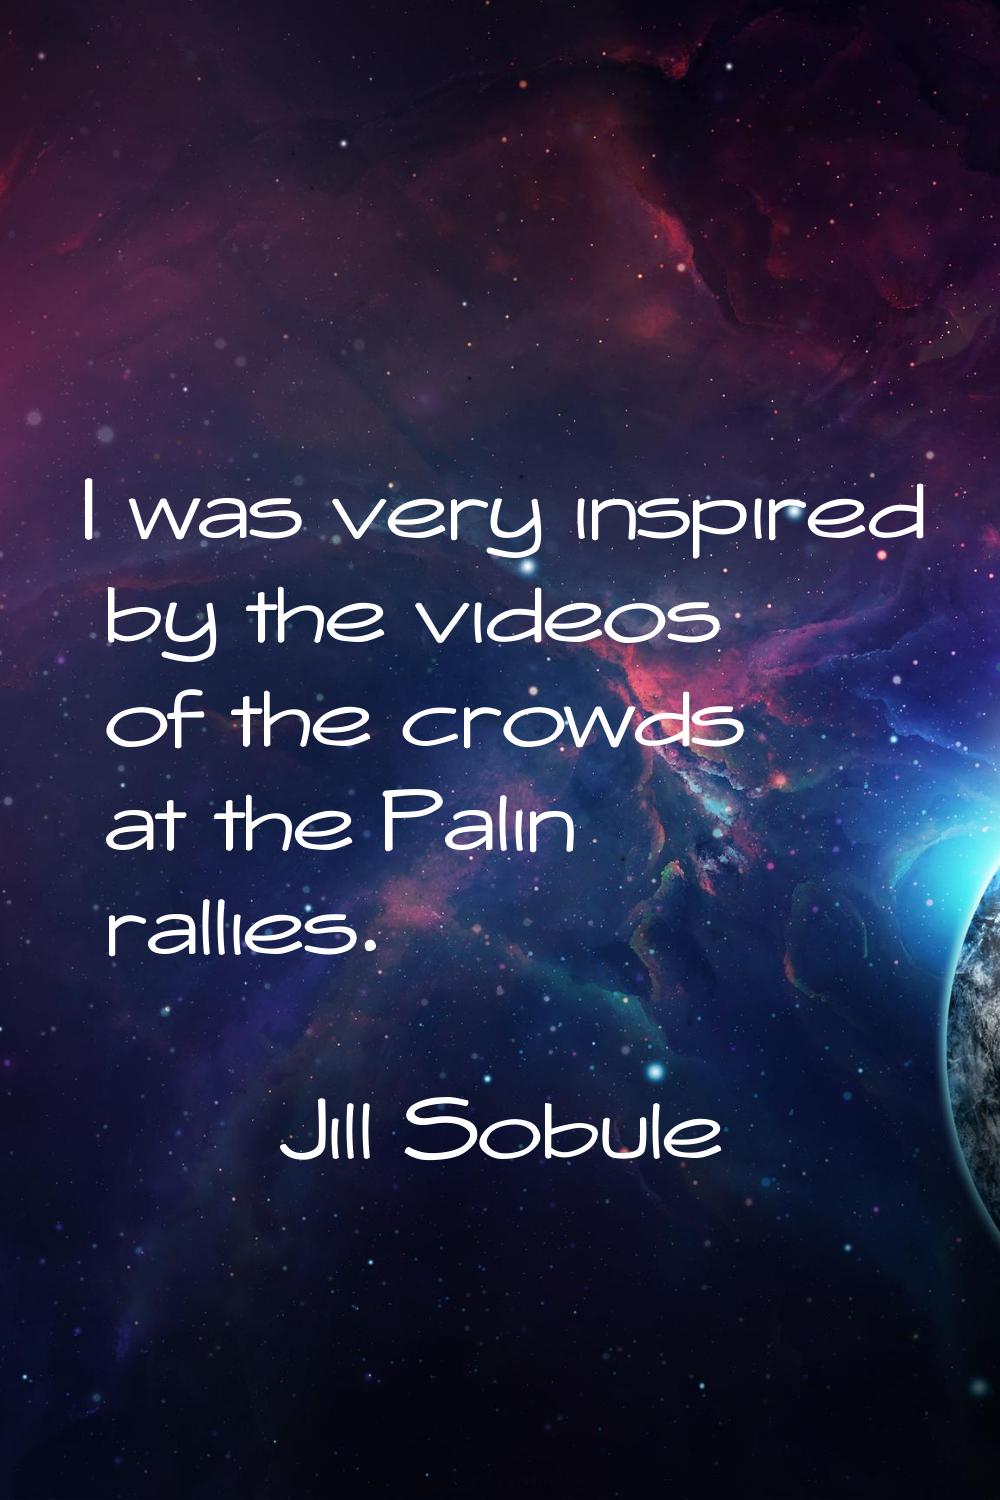 I was very inspired by the videos of the crowds at the Palin rallies.